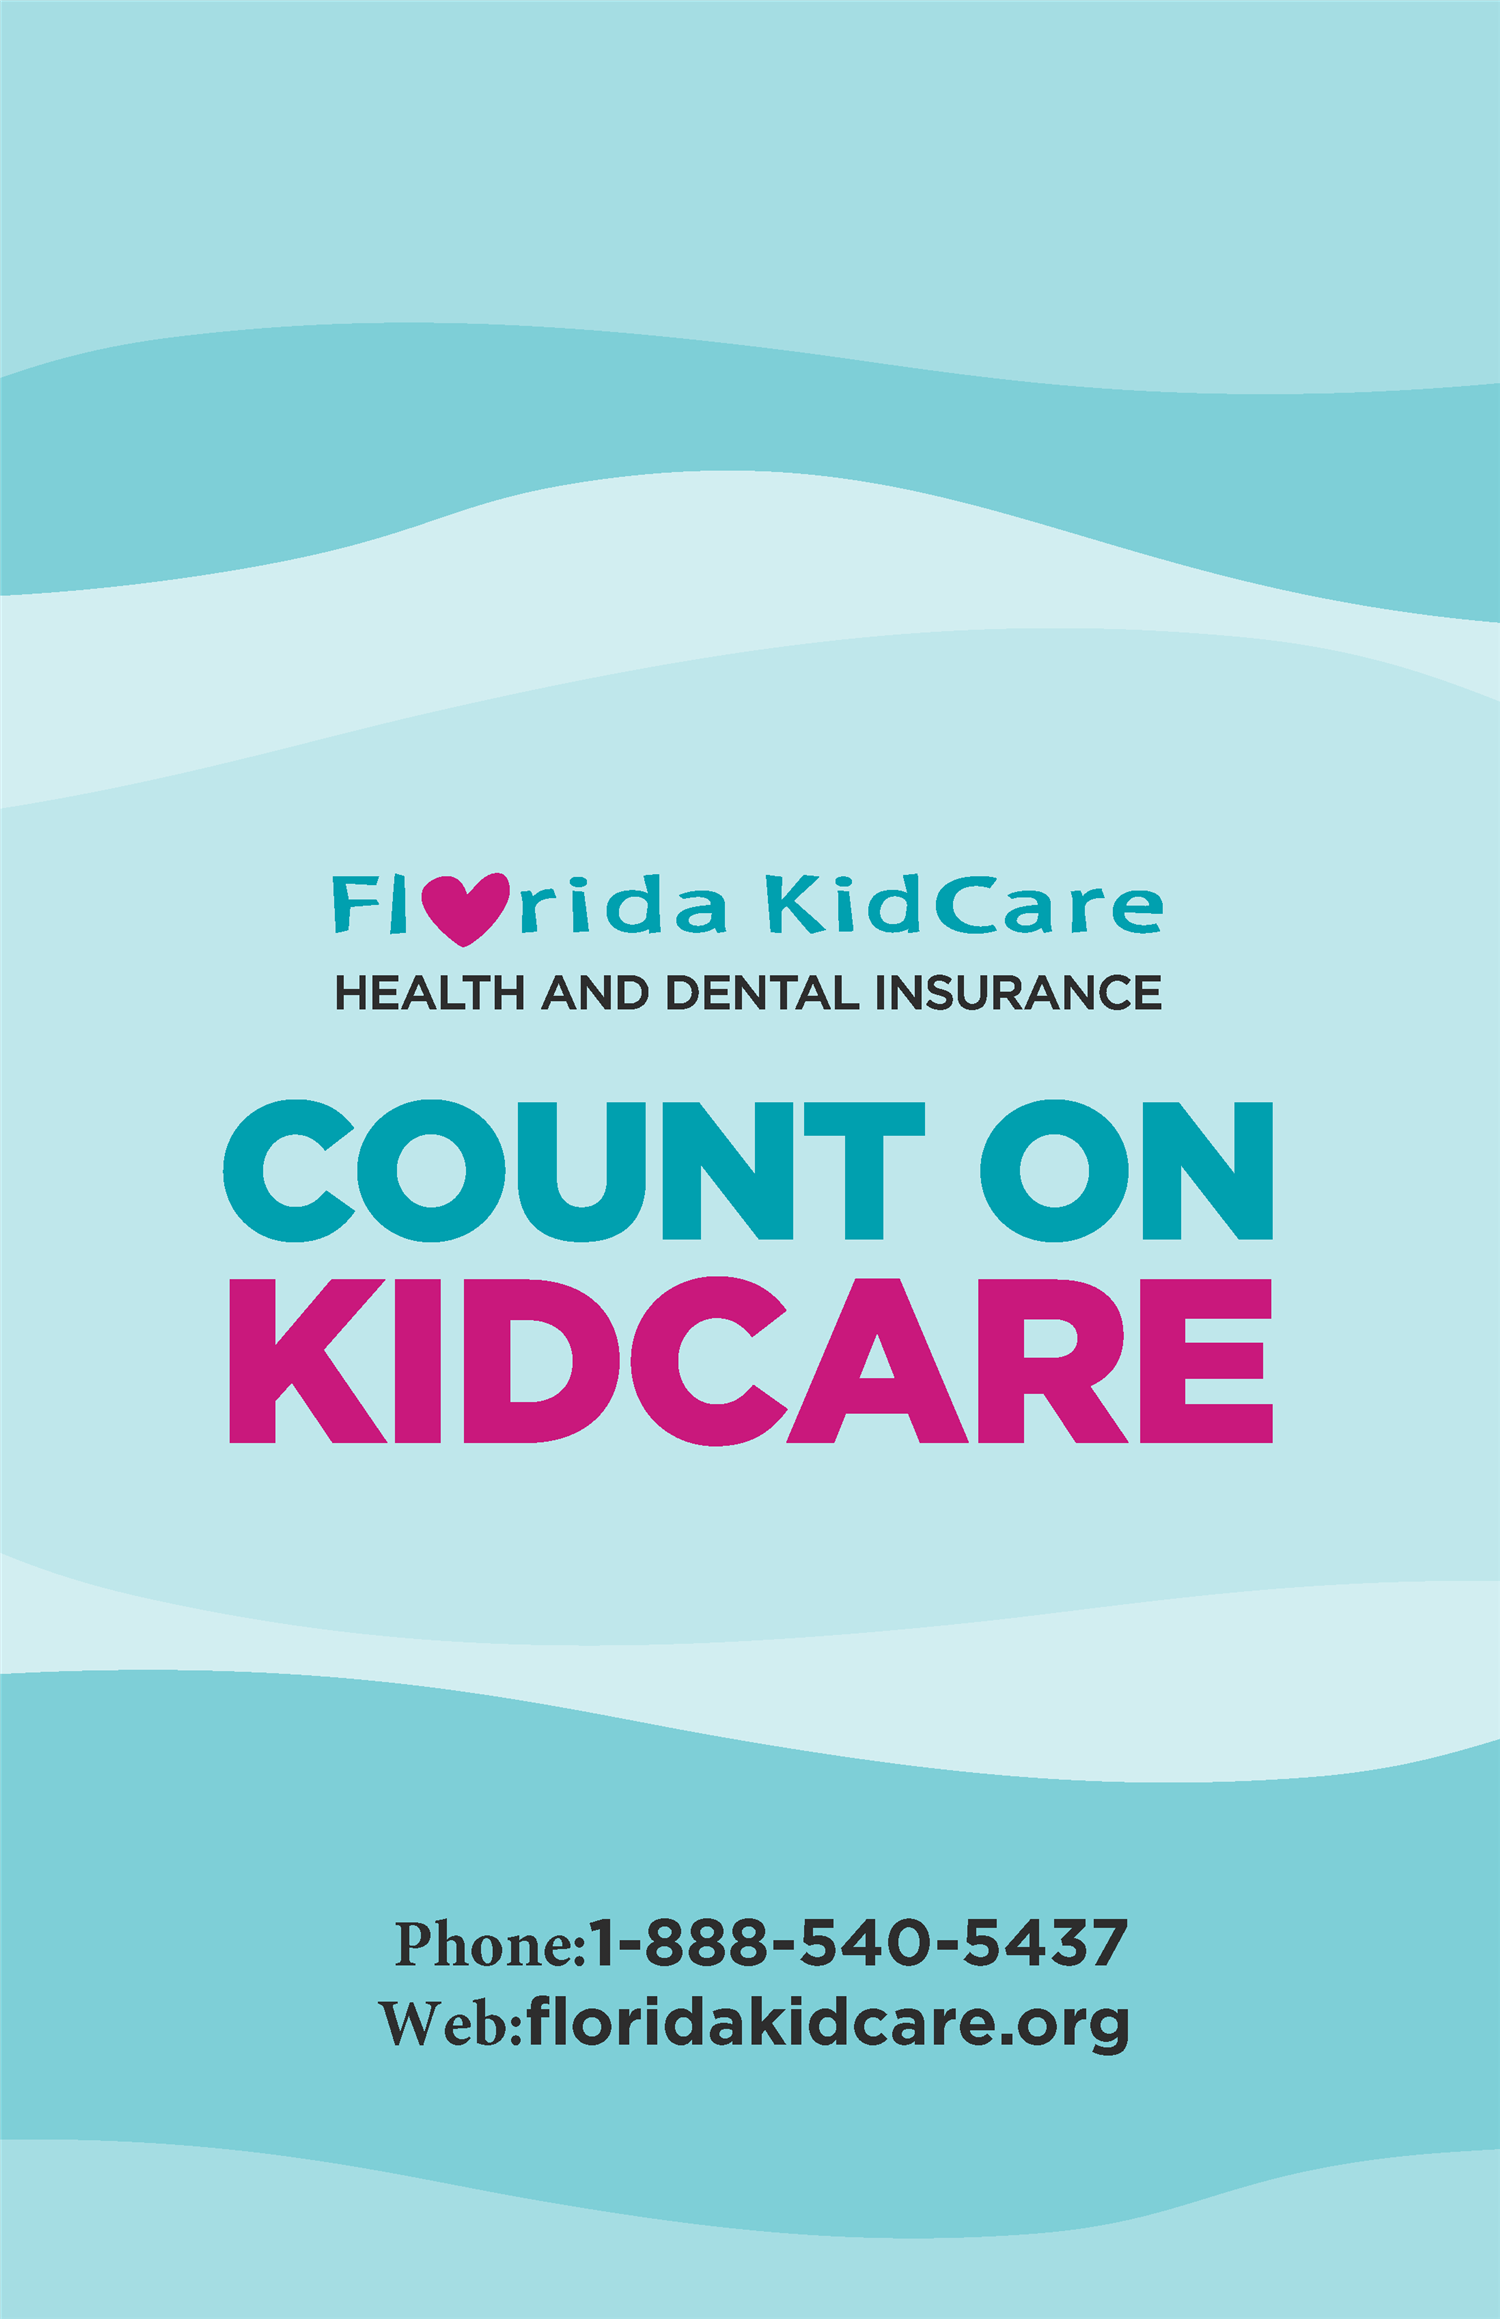 kidcare